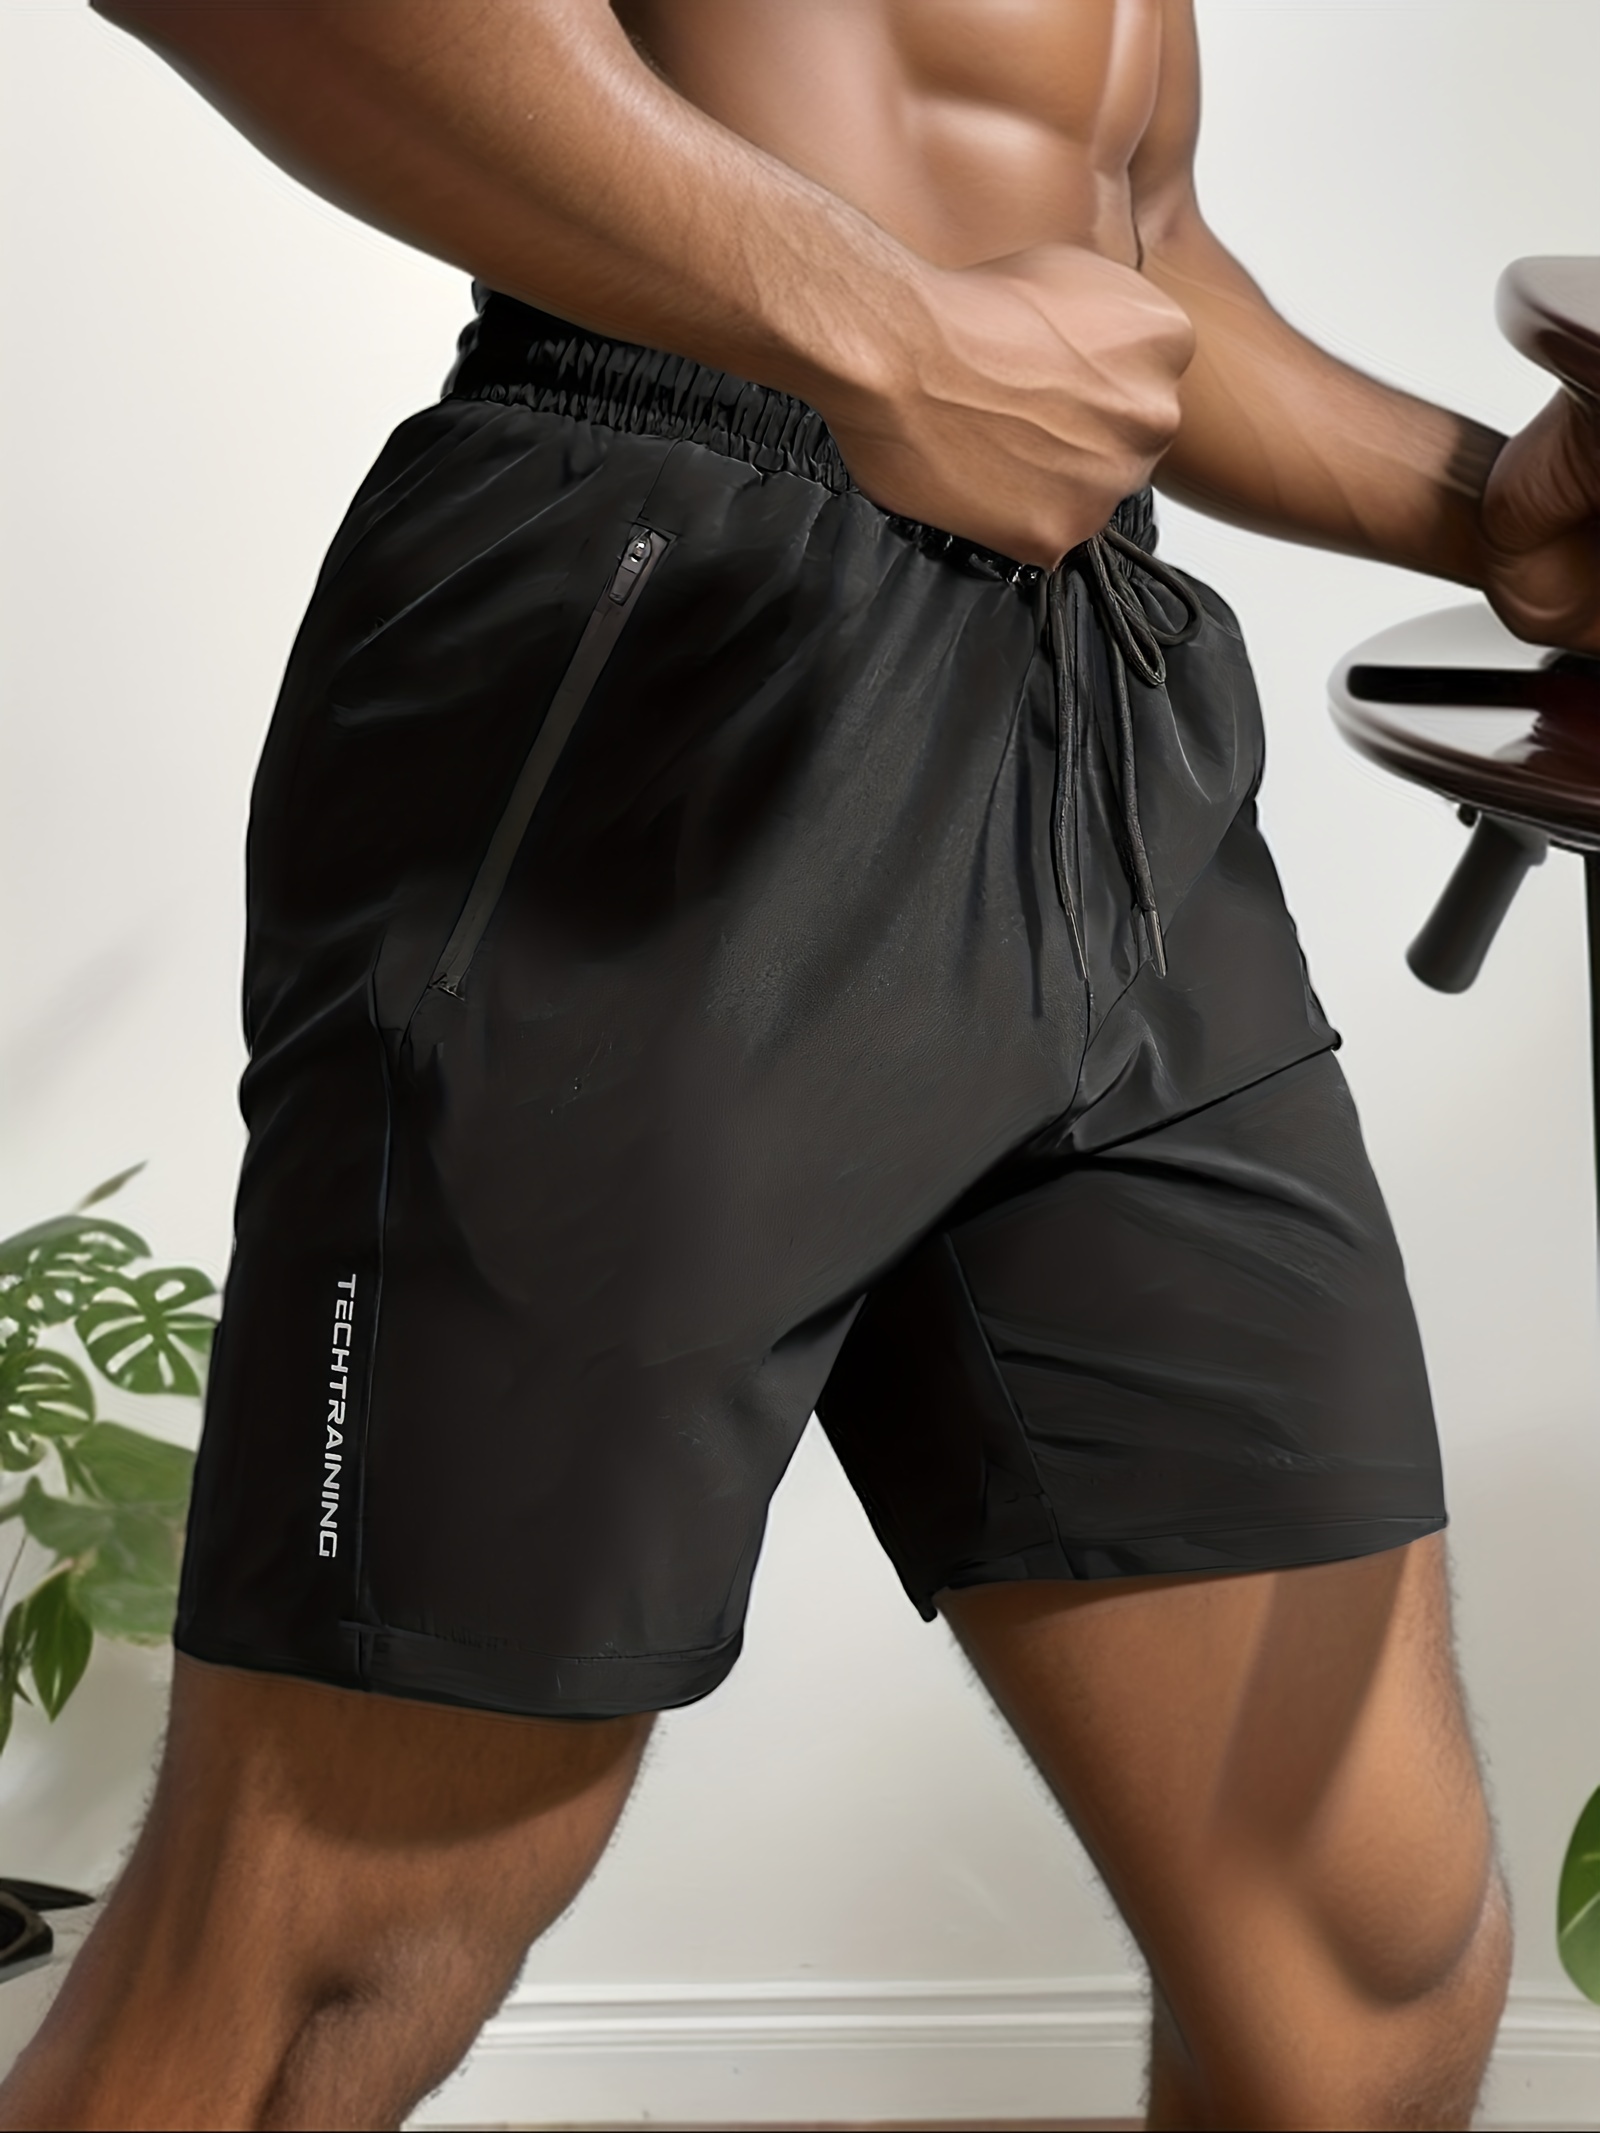 Mens 2 In 1 Running Shorts Quick Dry Athletic Shorts With Leggings,  Lightweight Workout Training Shorts